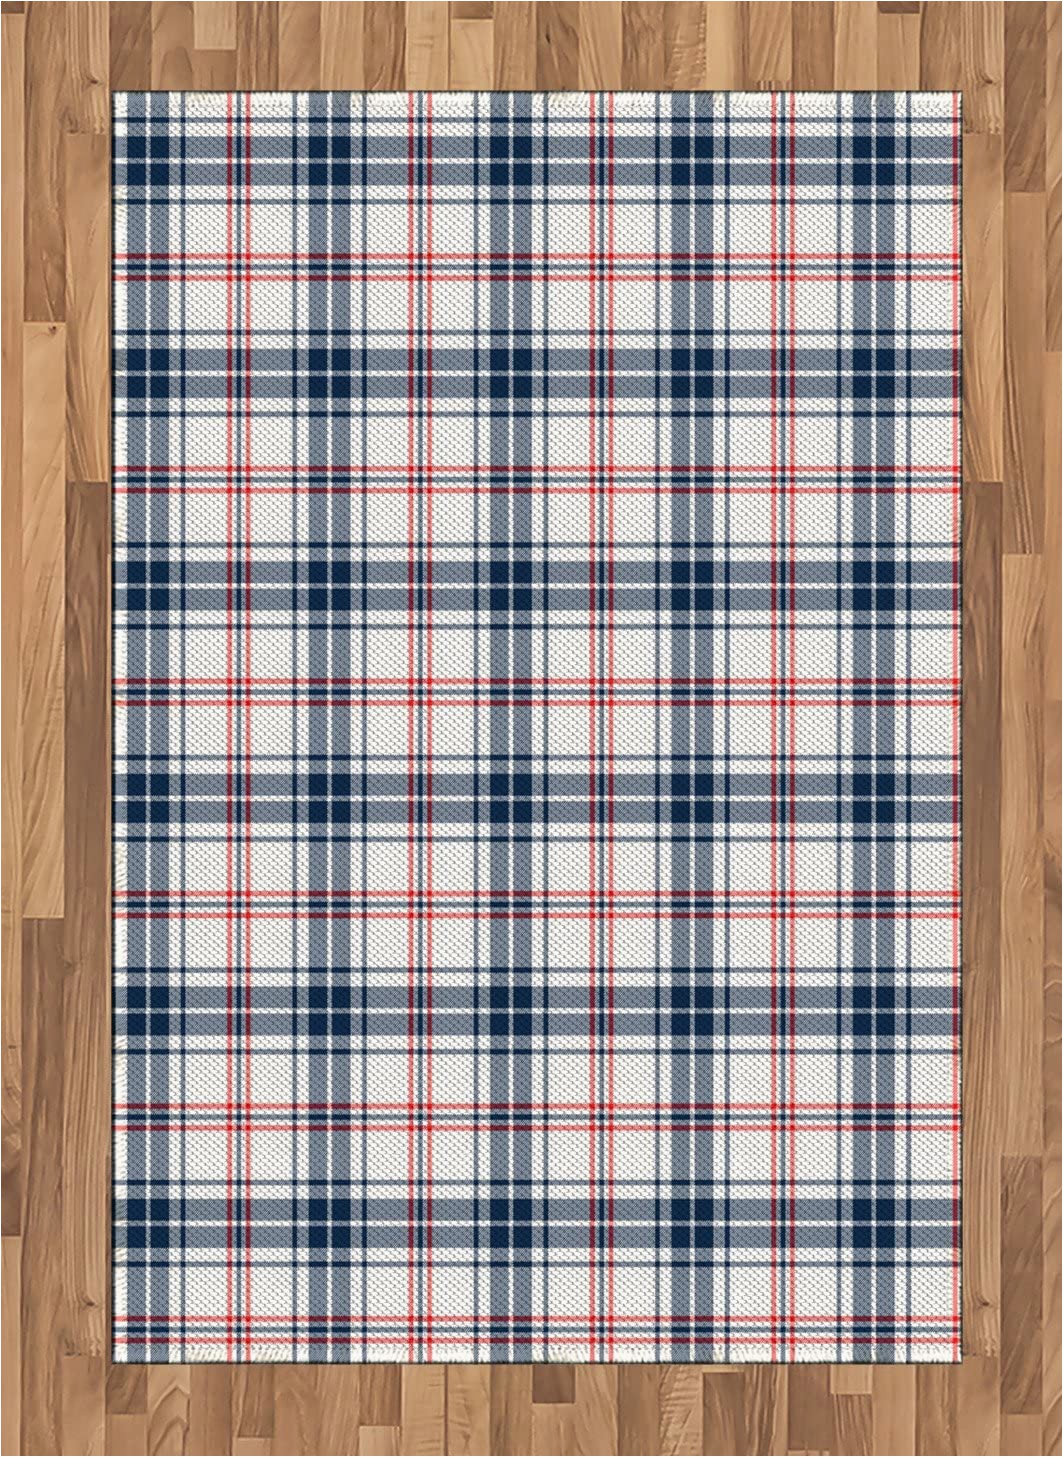 Blue and White Check Rug Amazon Ambesonne Plaid area Rug Traditional Checkered